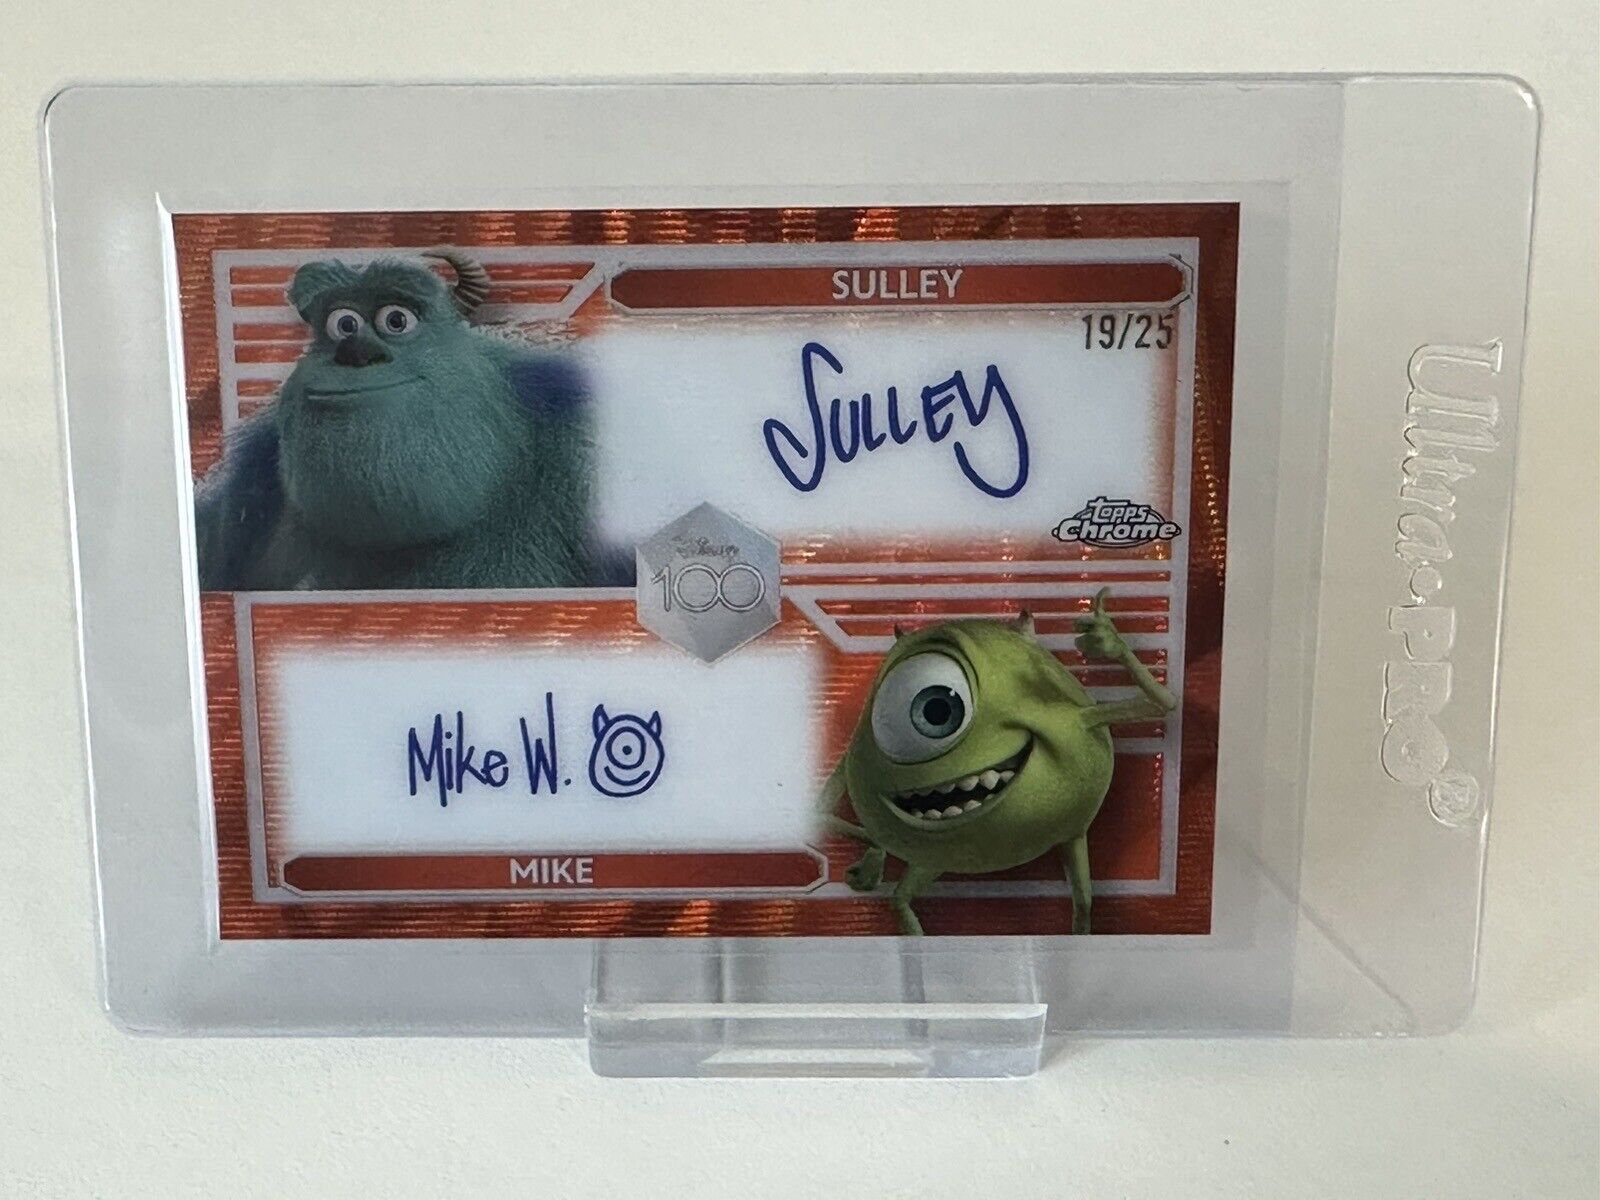 2023 Topps Chrome Disney 100 Monsters Inc Sulley Mike Dual DL-6 Orange 19/25